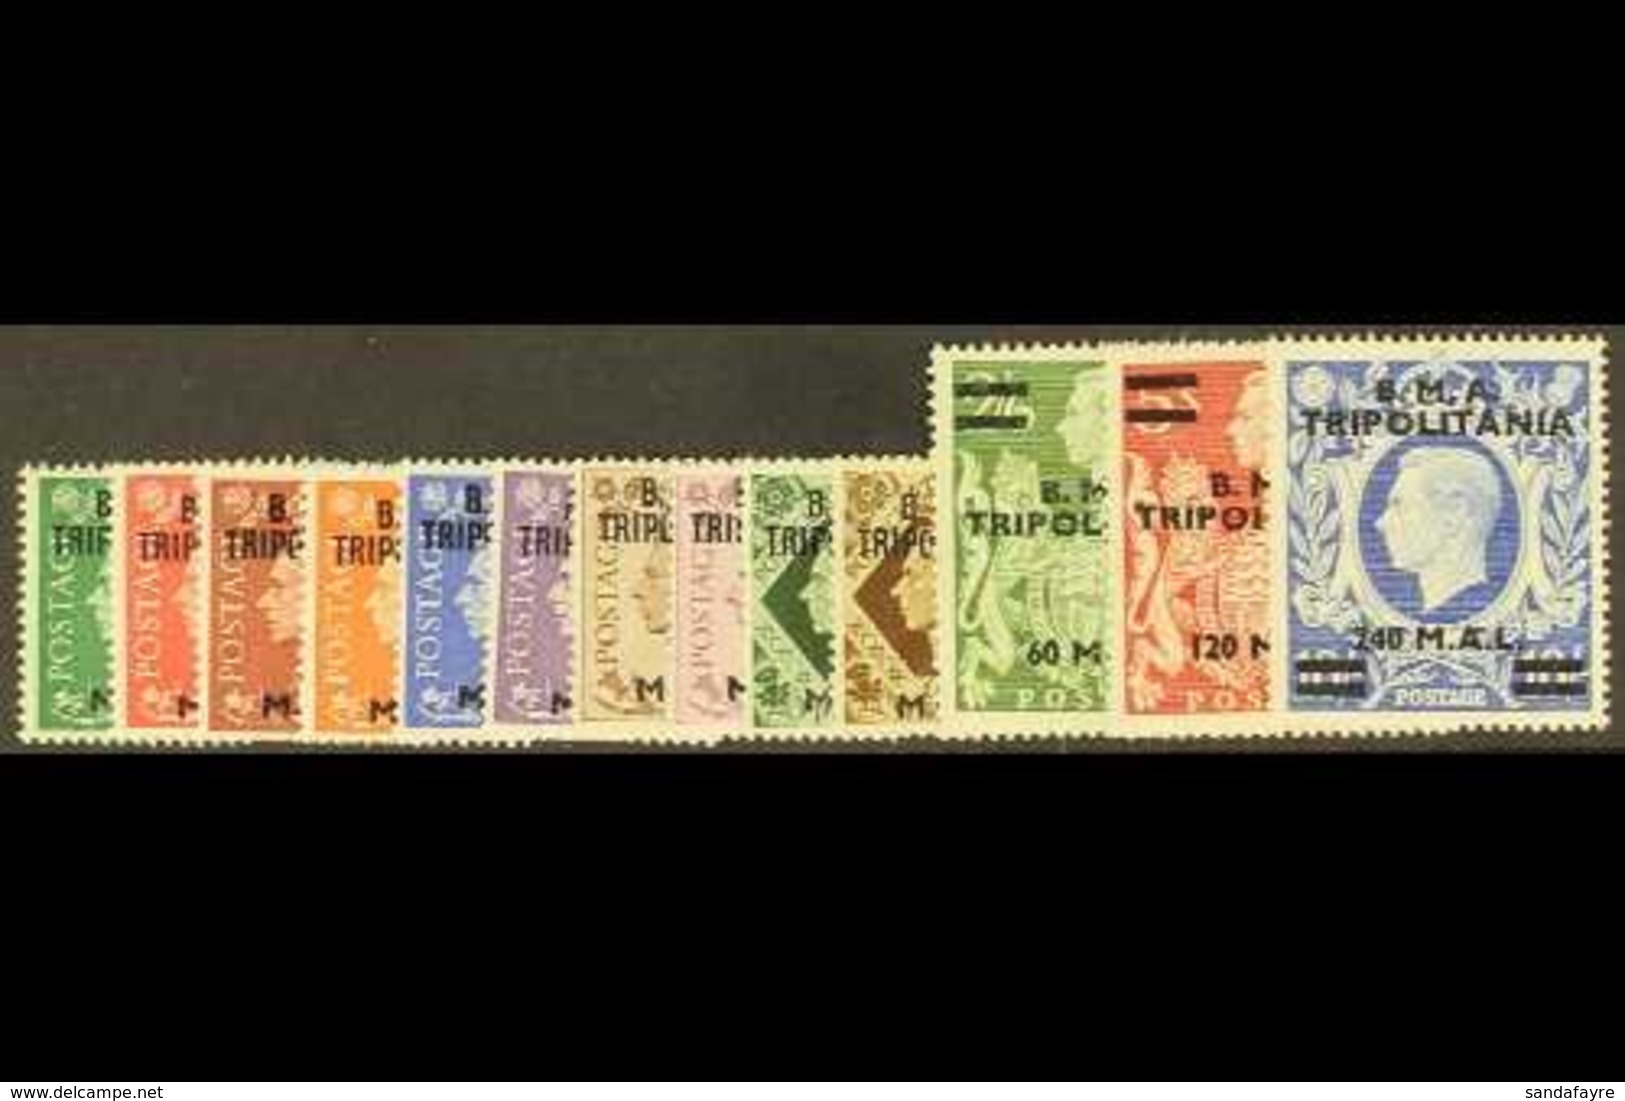 TRIPOLITANIA  1948 B.M.A. Surcharge Set Complete, SG T1/13, Very Fine Never Hinged Mint. (13 Stamps) For More Images, Pl - Italian Eastern Africa